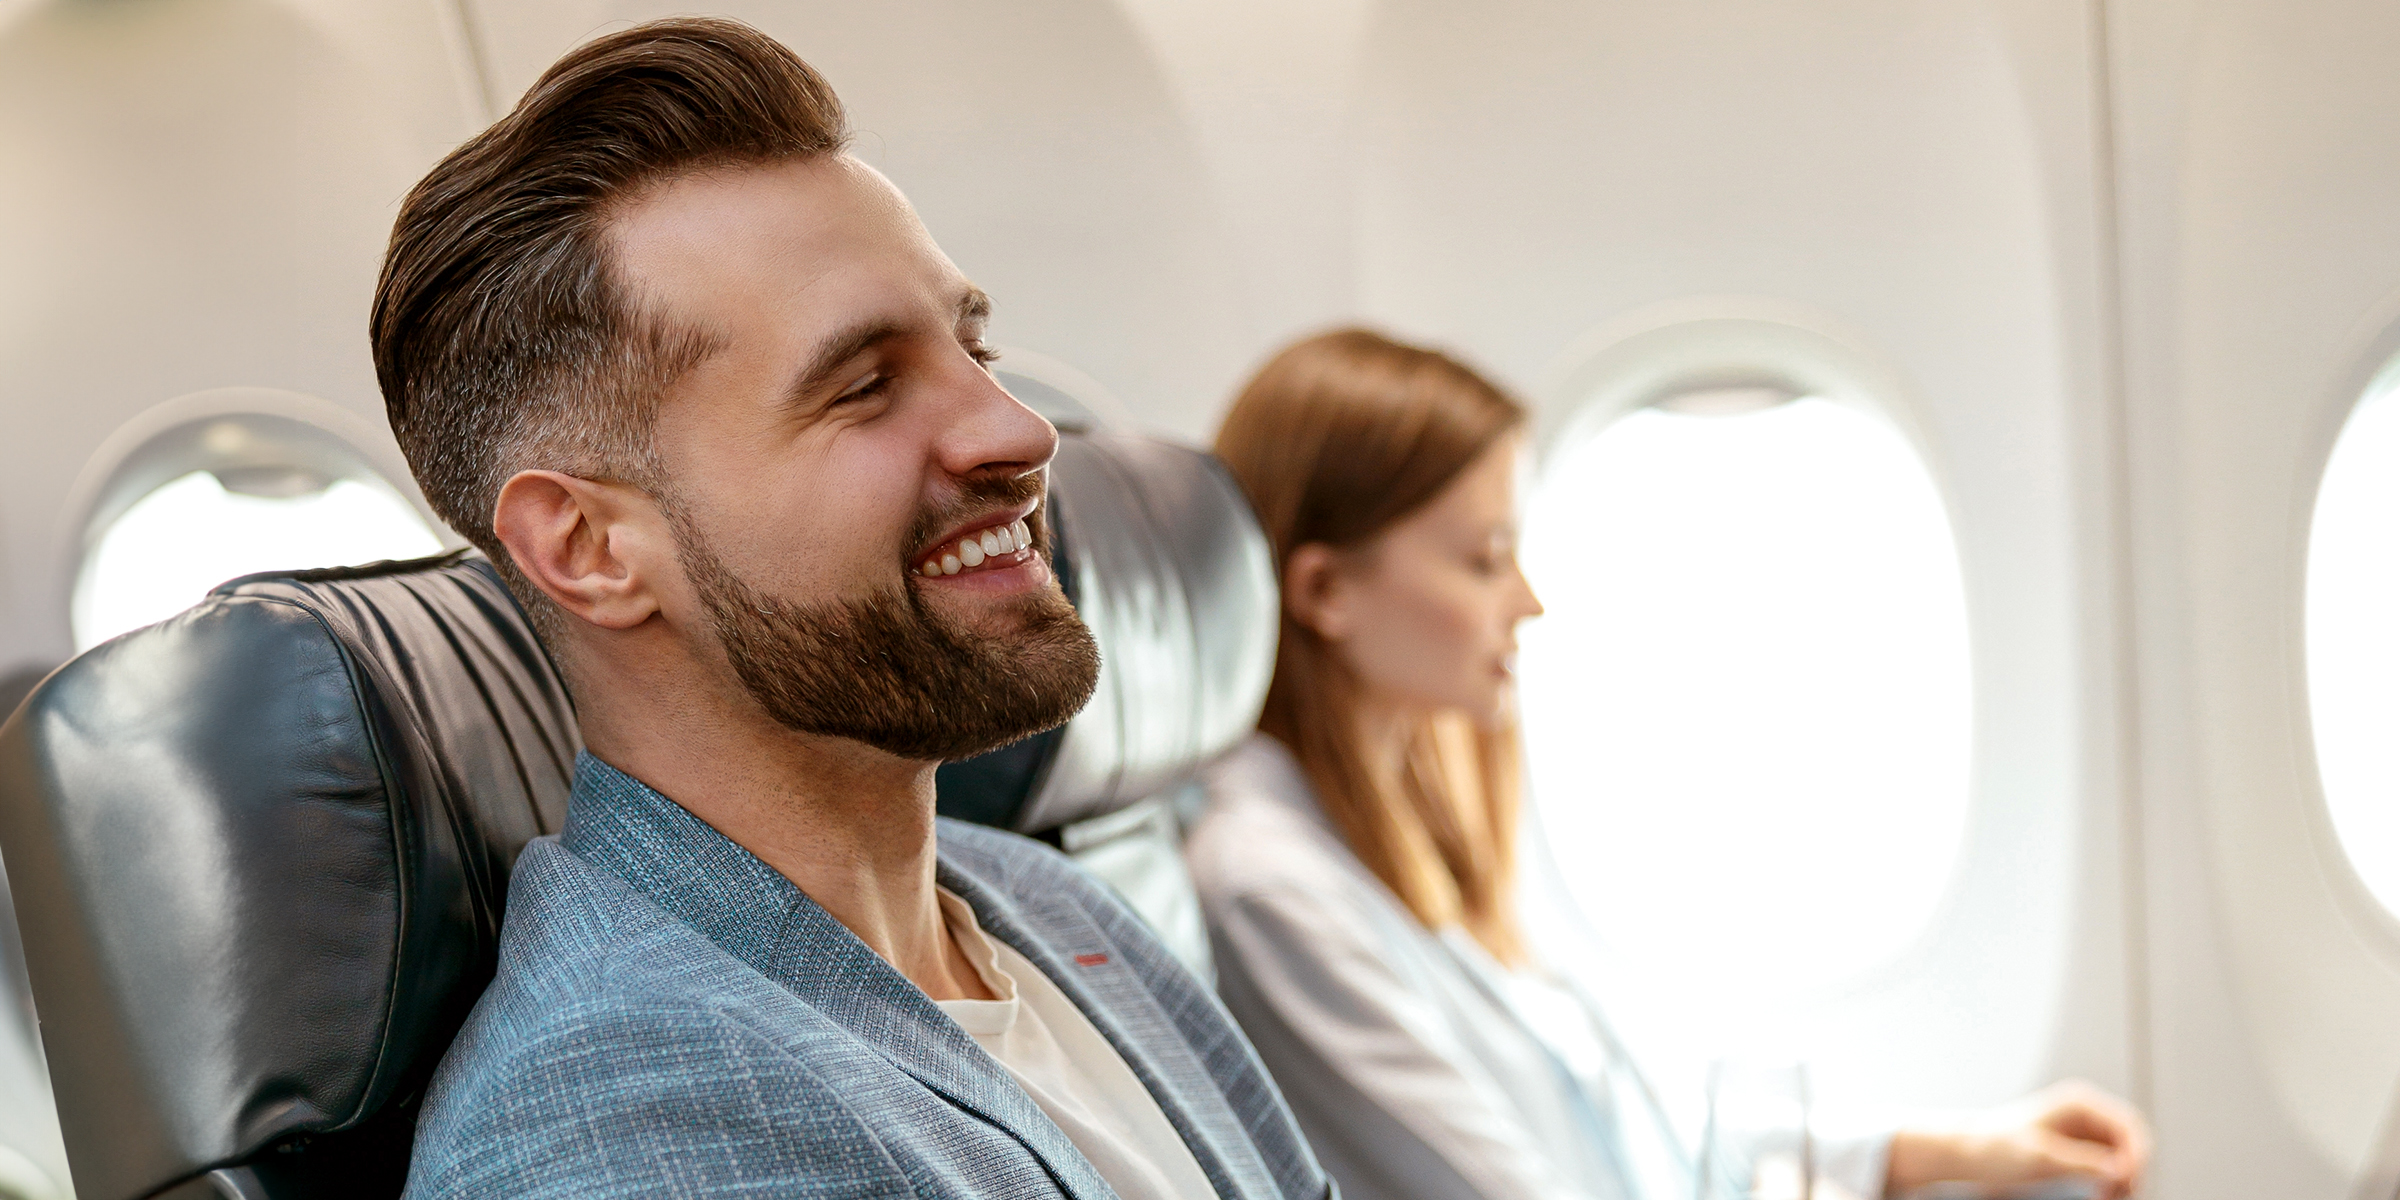 A man and woman alongside each other on an airplane flight | Source: Shutterstock